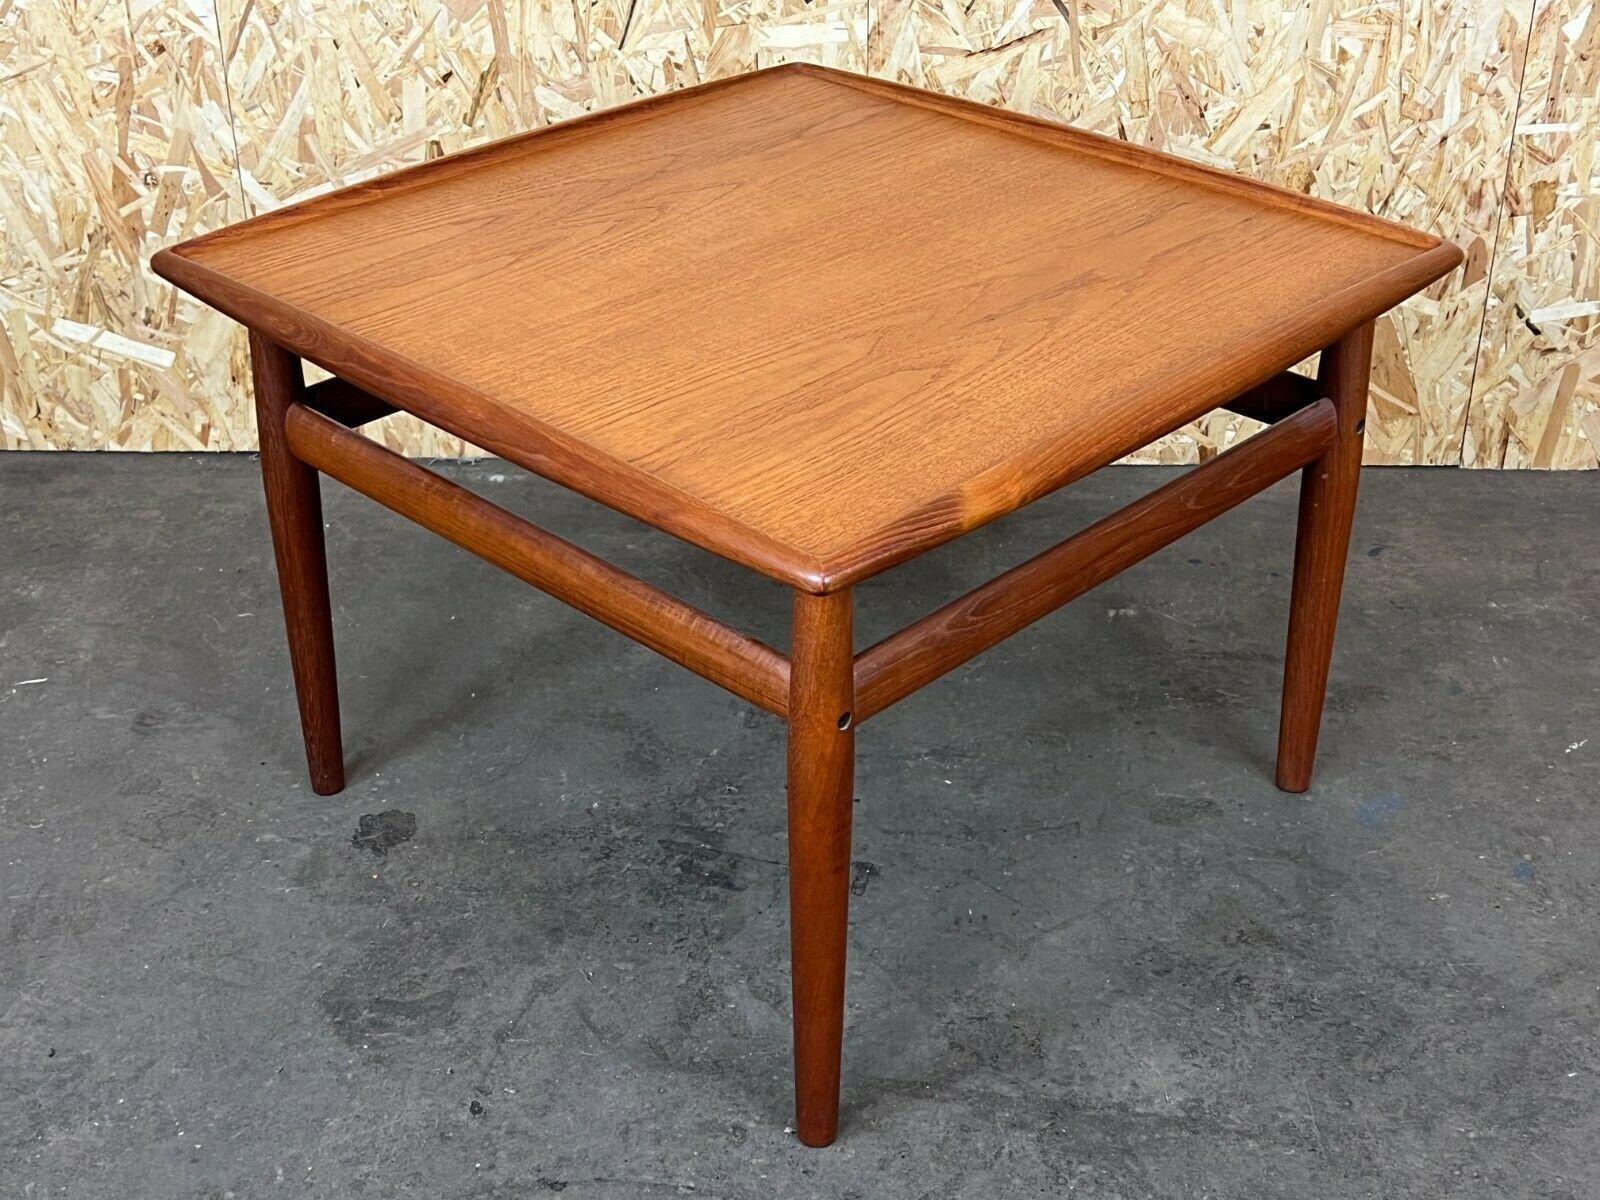 60s 70s teak coffee table Grete Jalk for Glostrup Danish 60s

Object: coffee table

Manufacturer: Glostrup

Condition: good

Age: around 1960-1970

Dimensions:

70cm x 70cm x 48cm

Other notes:

The pictures serve as part of the